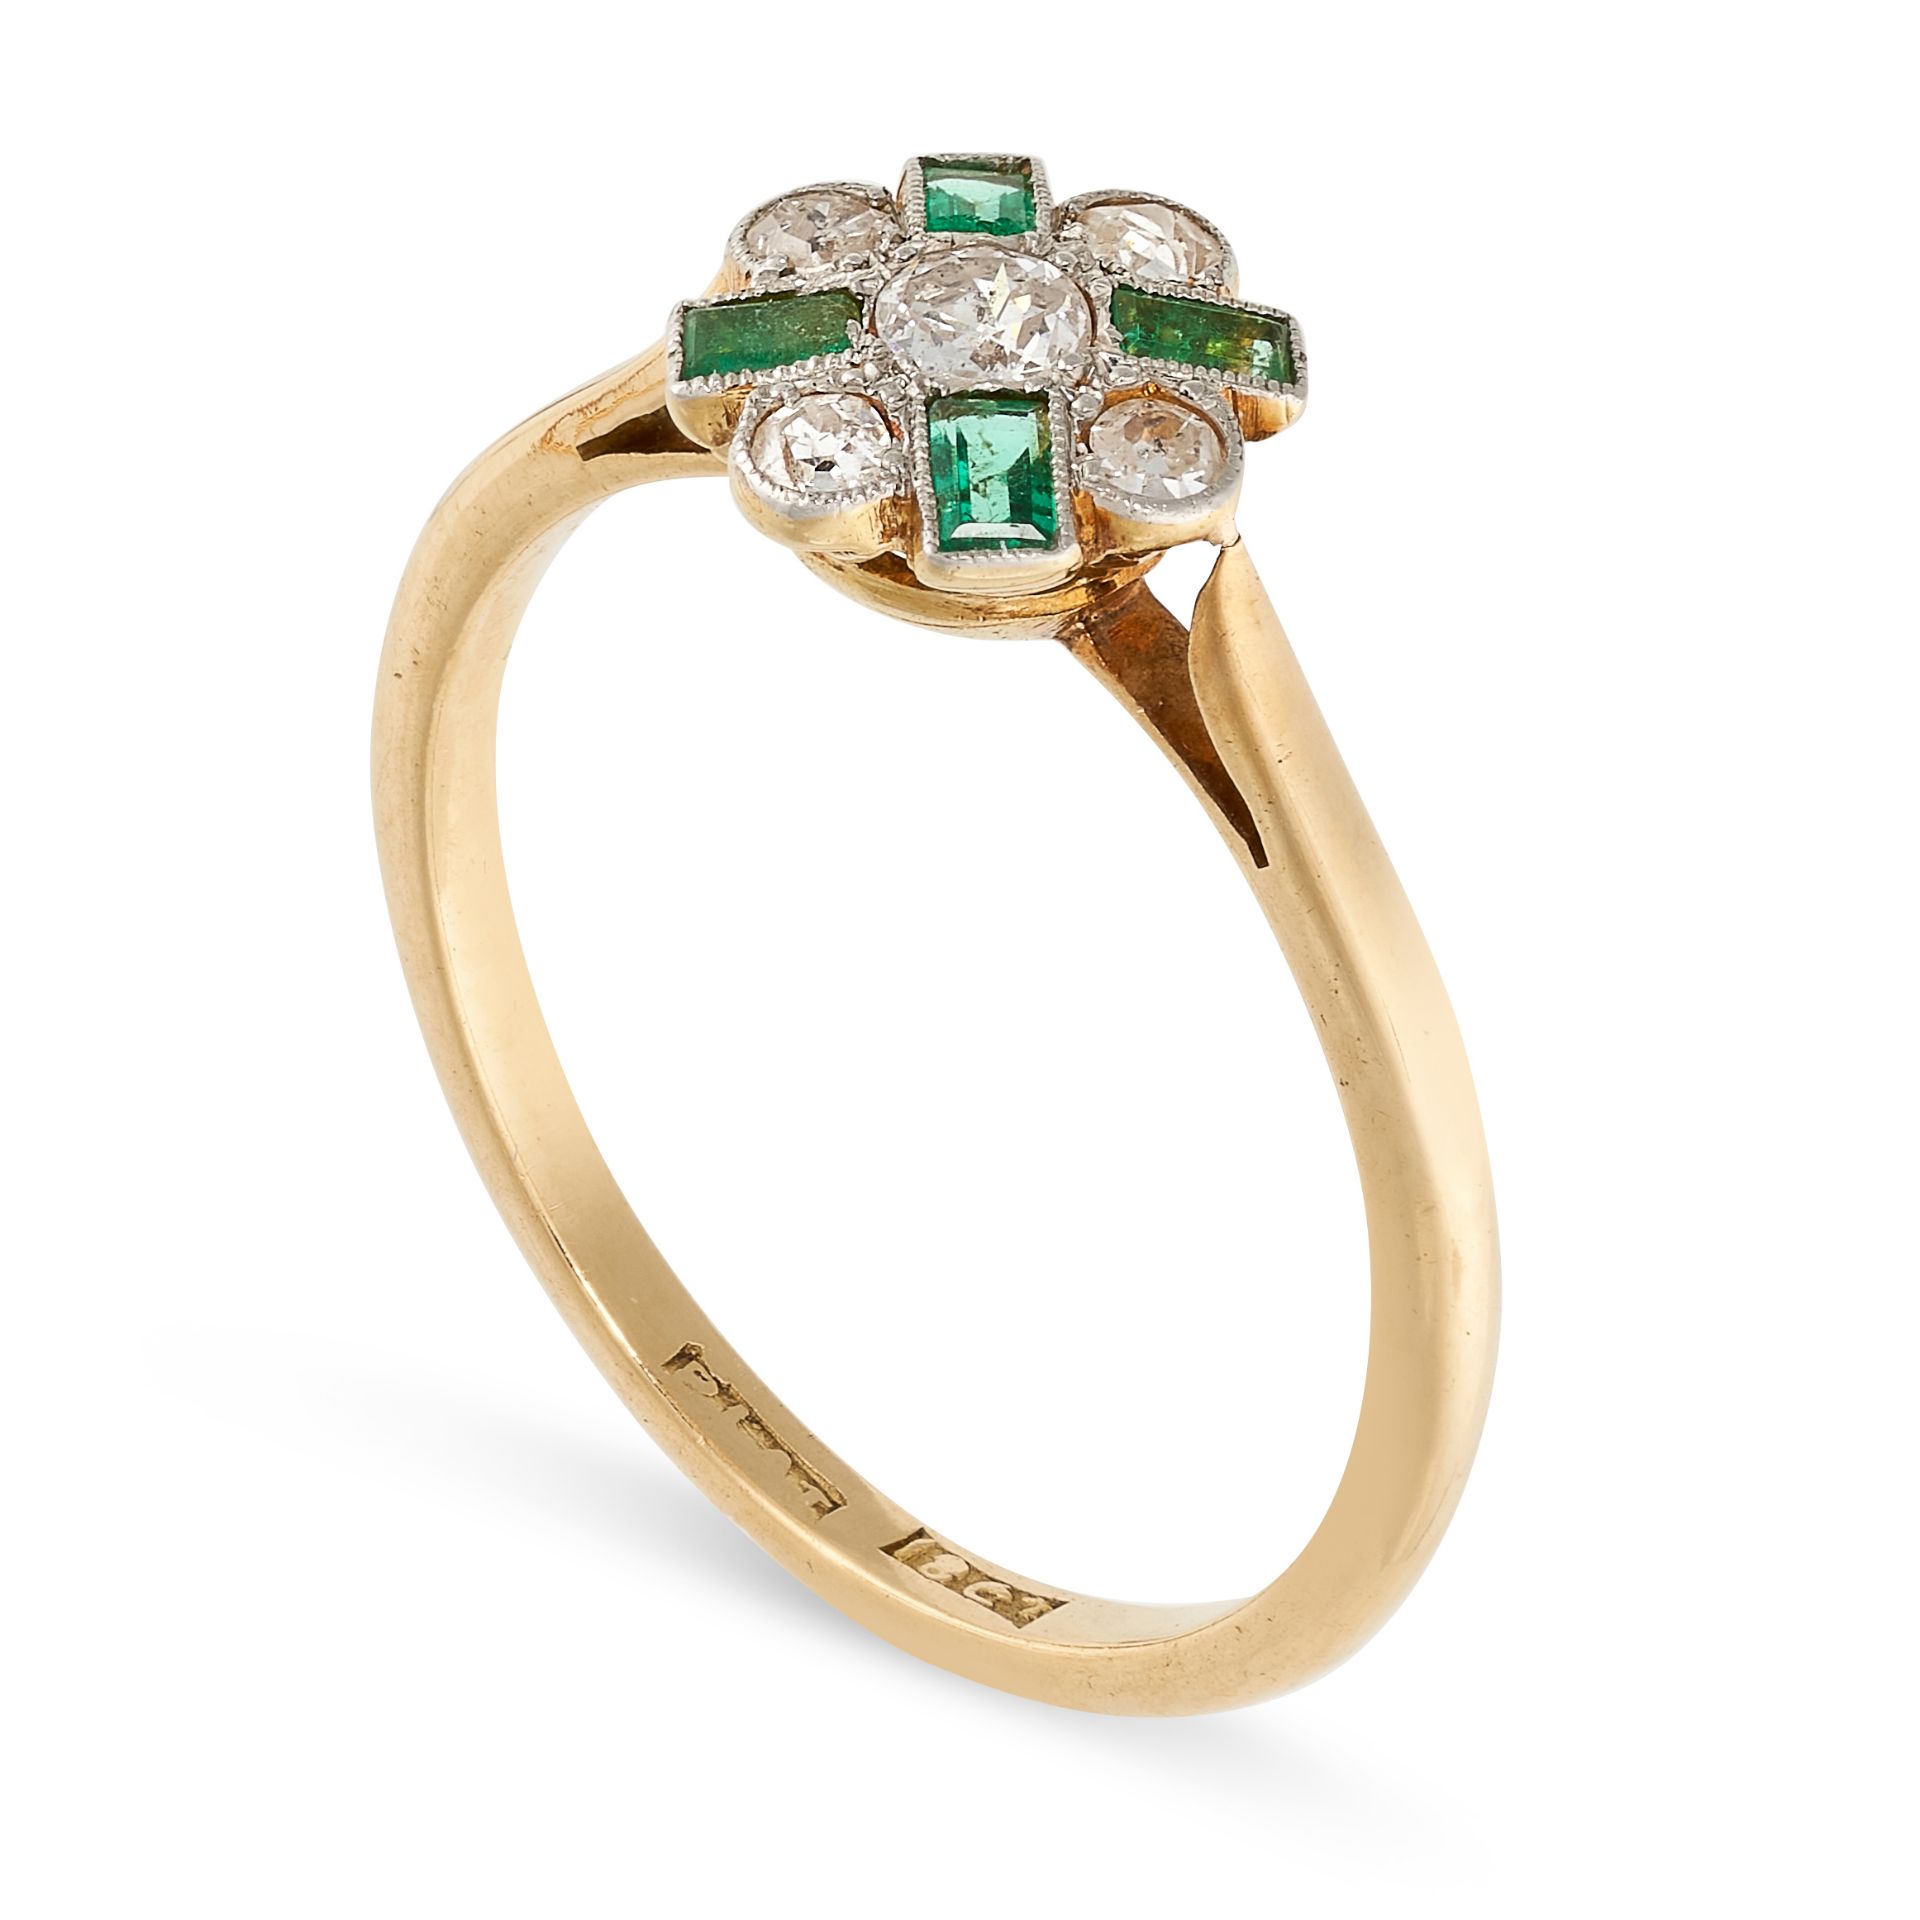 NO RESERVE - AN ART DECO DIAMOND AND EMERALD RING in 18ct yellow gold and platinum, set with a - Image 2 of 2